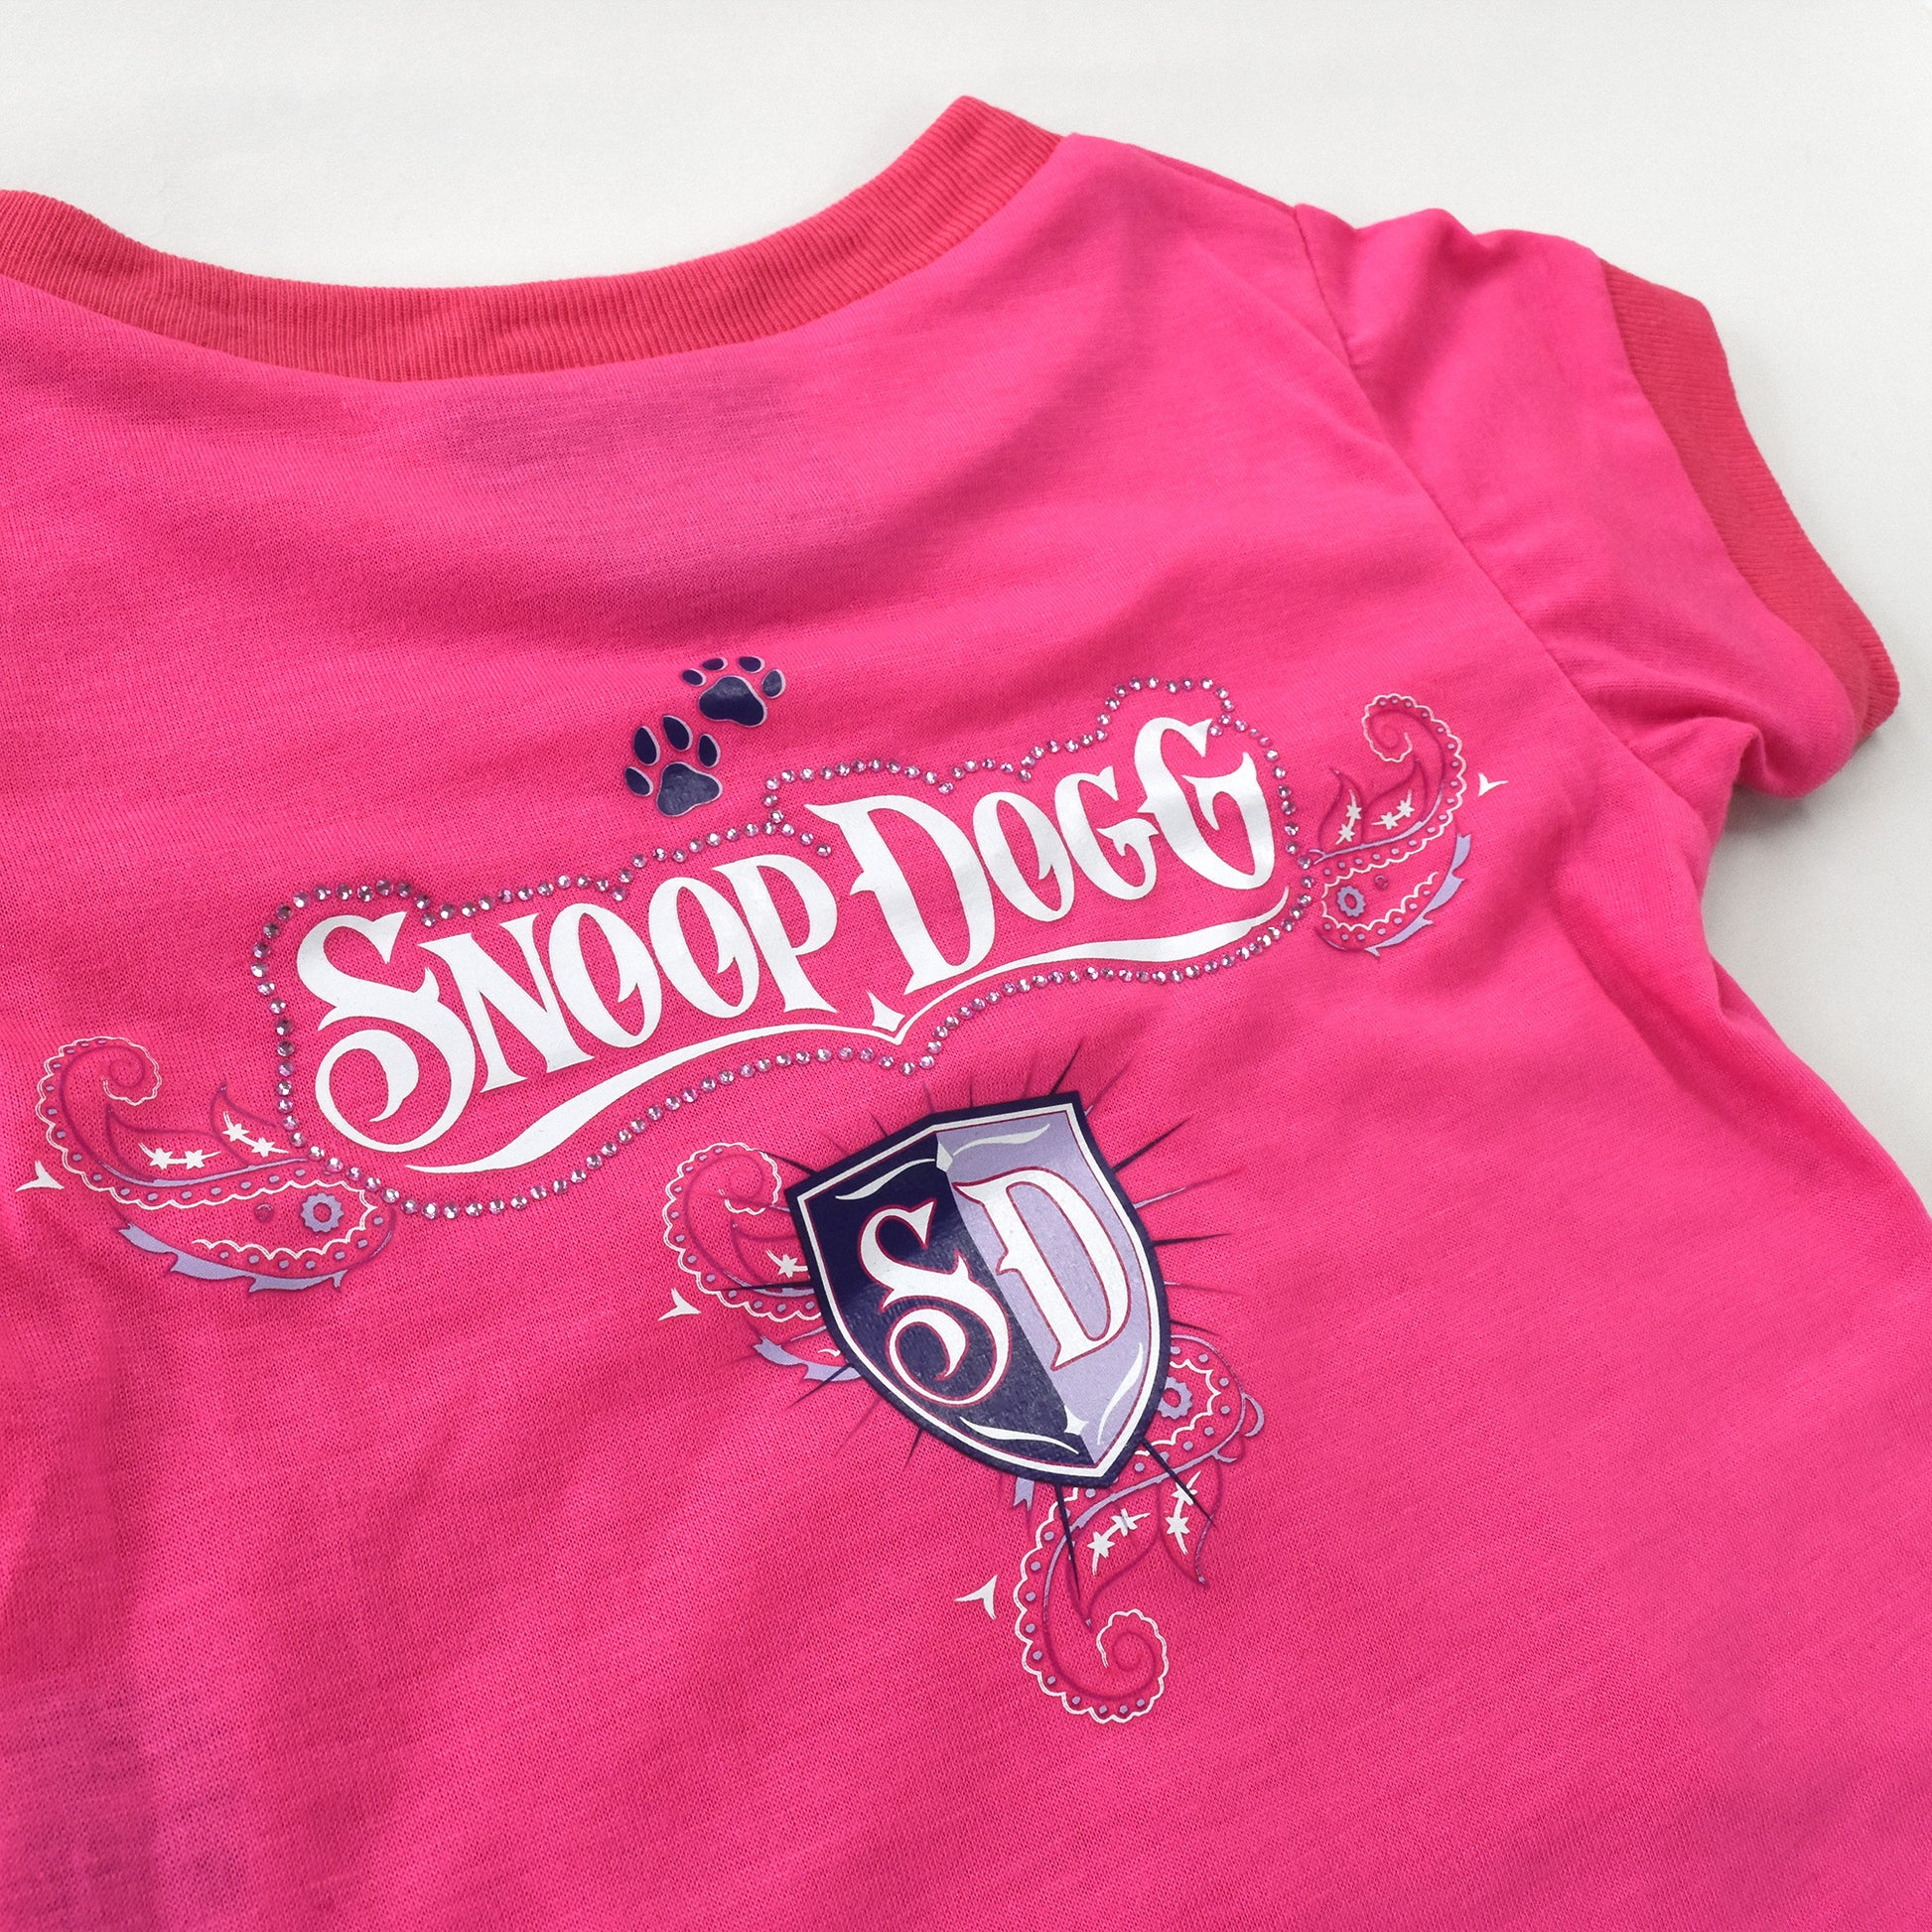 A close up of the Boss Lady Deluxe Pet T-Shirt sparkle design.